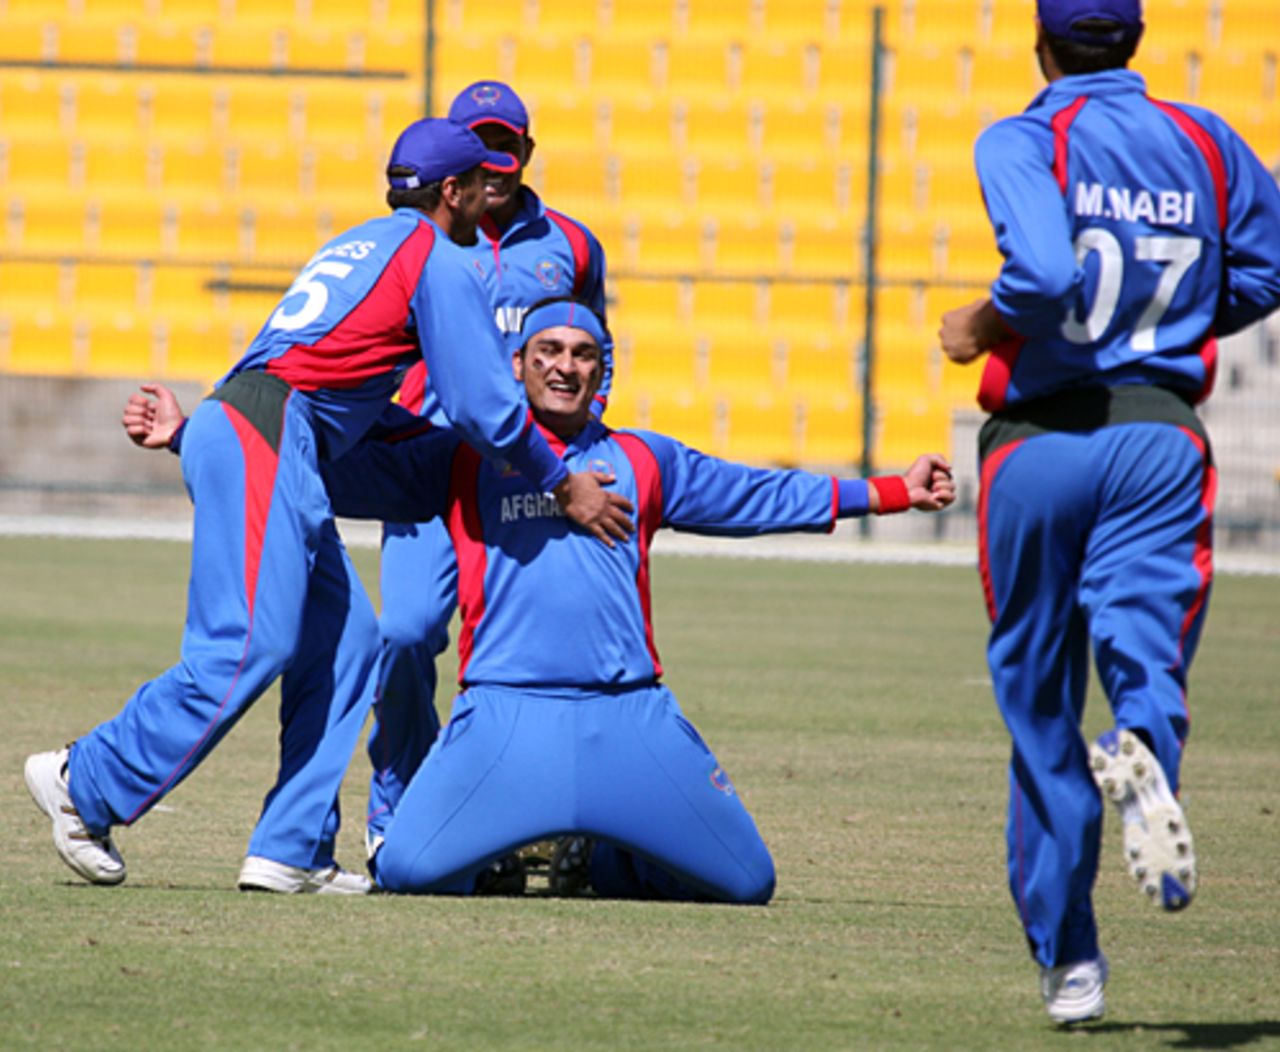 Hamid Hassan sinks to his knees at the moment of victory for Afghanistan, Afghanistan v Scotland, ICC World Twenty20 Qualifiers, February 10, 2010 